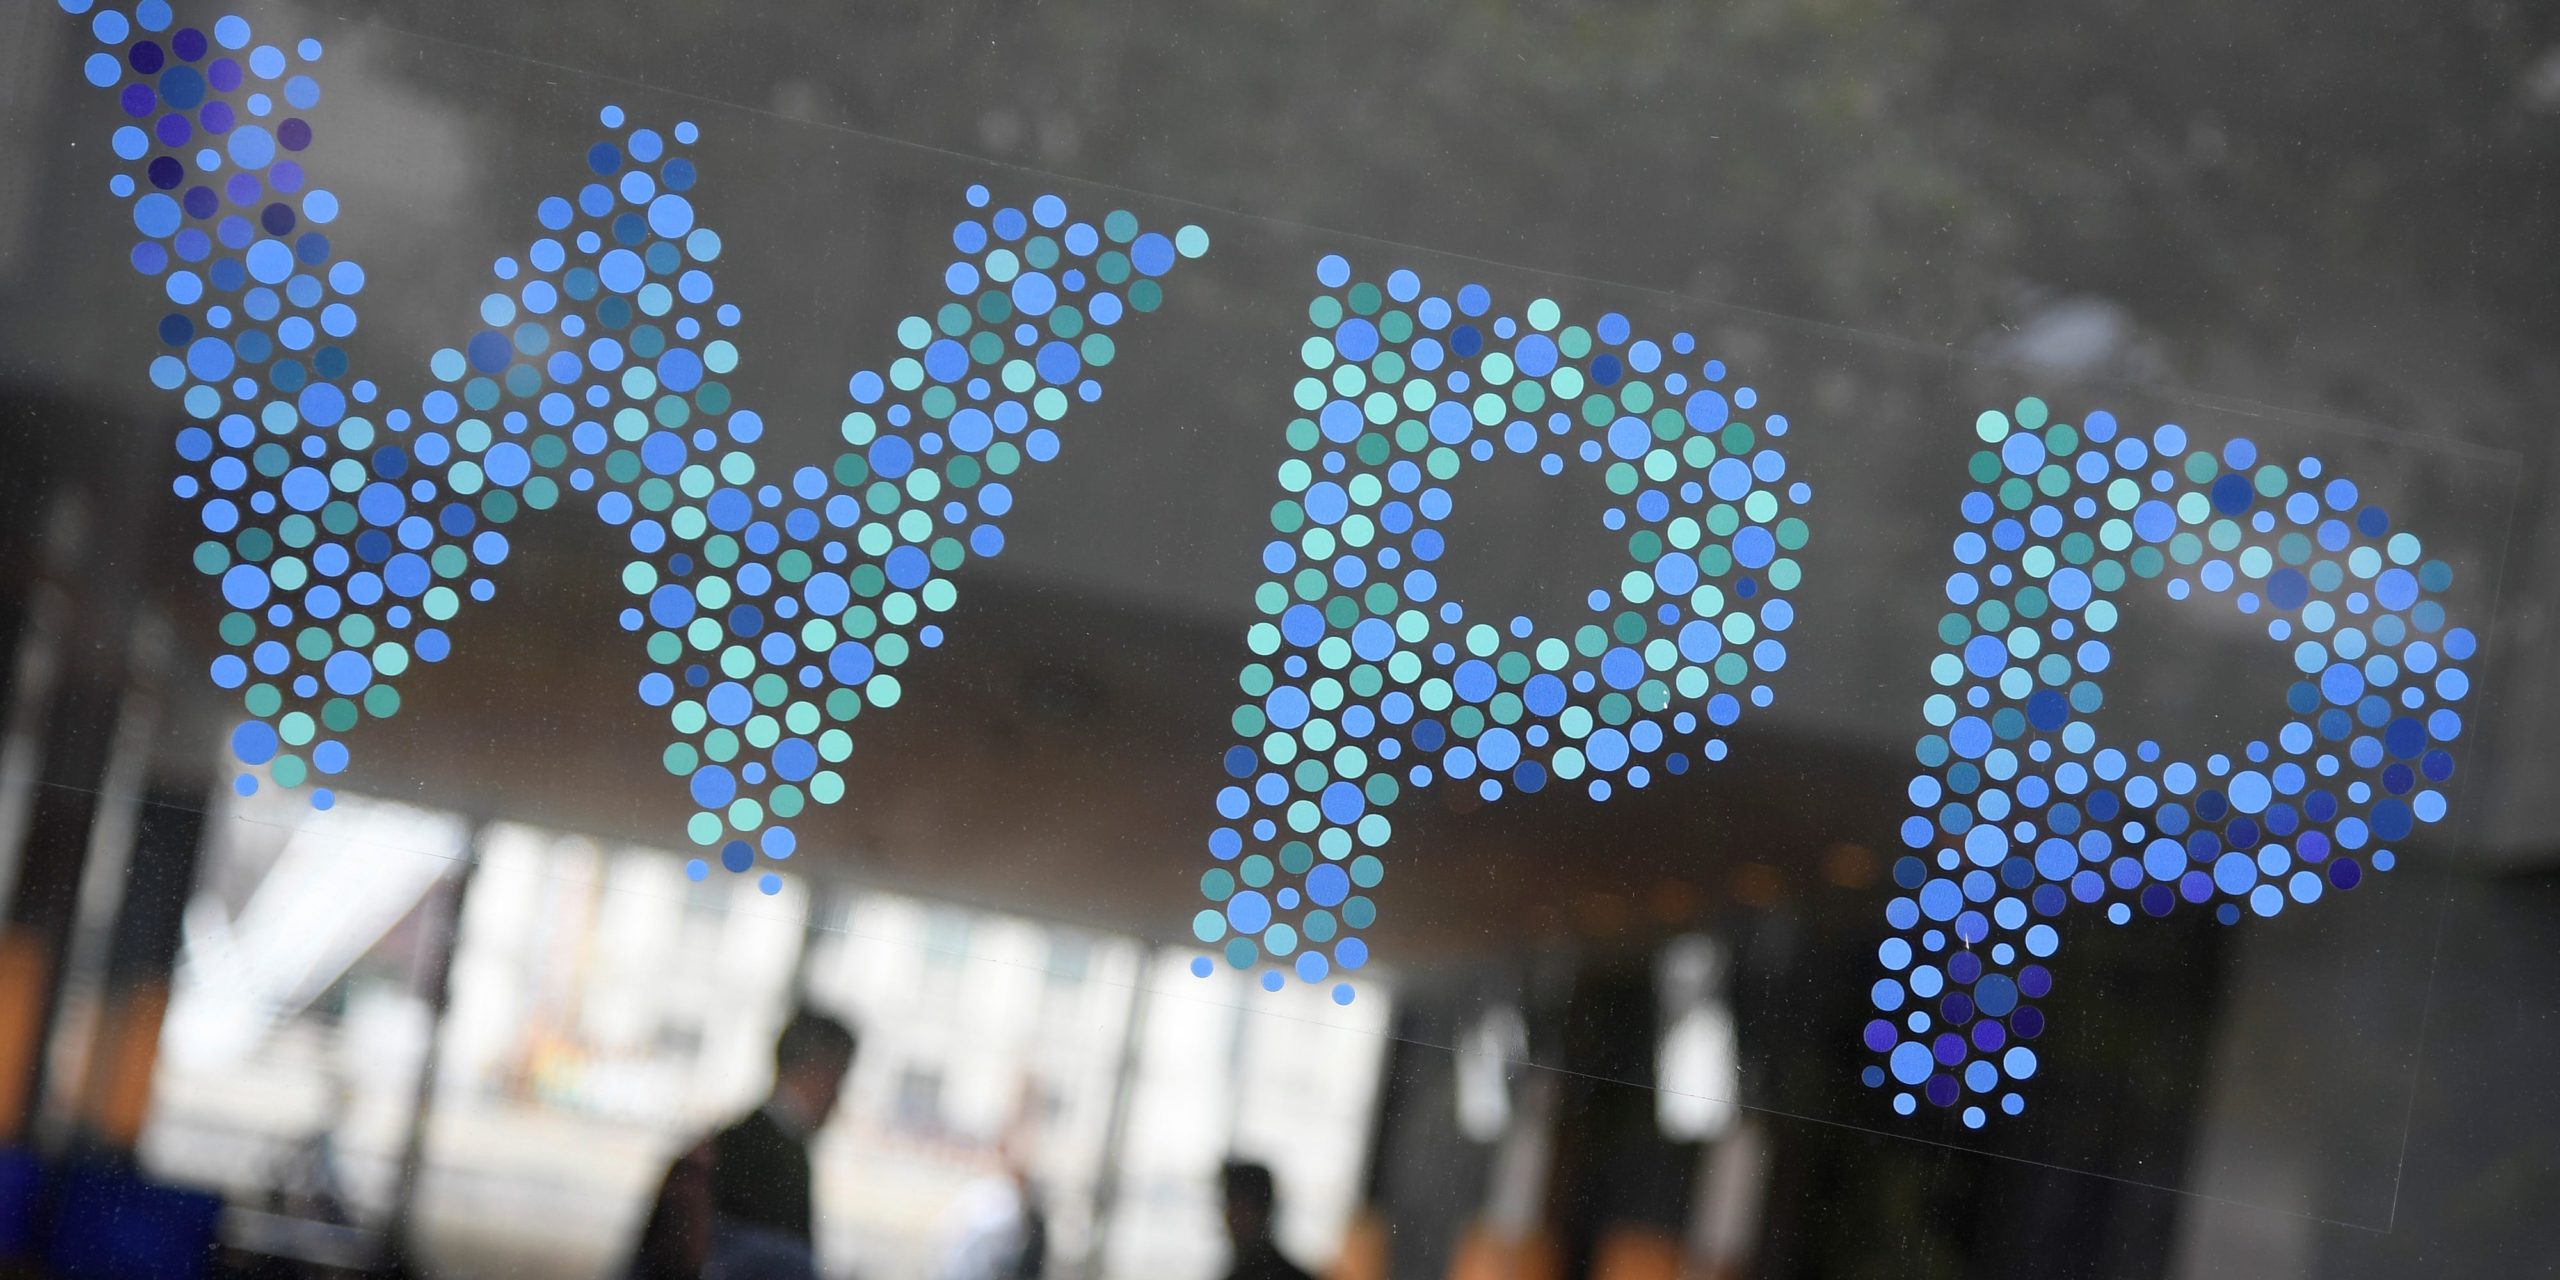 Where ad agency giants like WPP and IPG are hiring